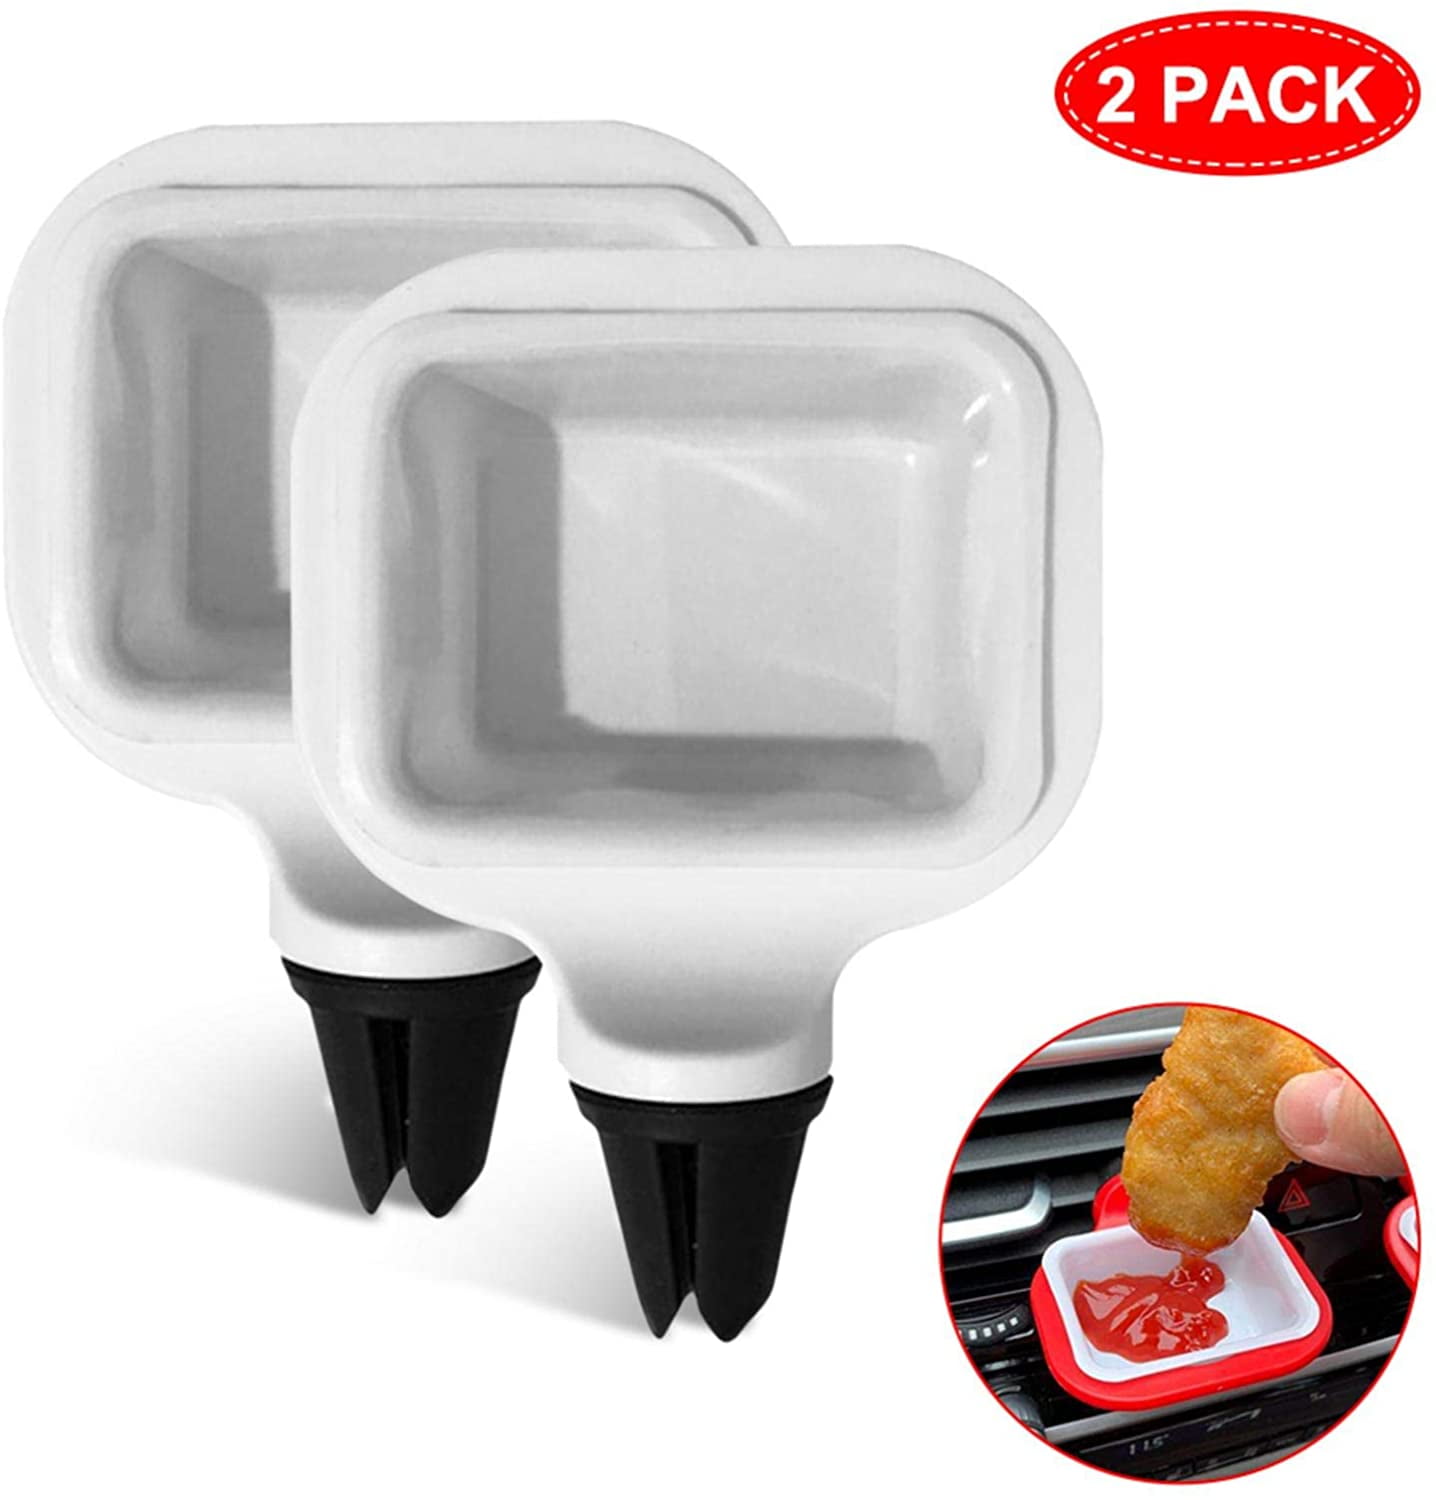 for Ketchup and Dipping Sauces Dip Clip In-Car Sauce Cup Holder Set for Vents of Vehicle 2 Pack, Red 